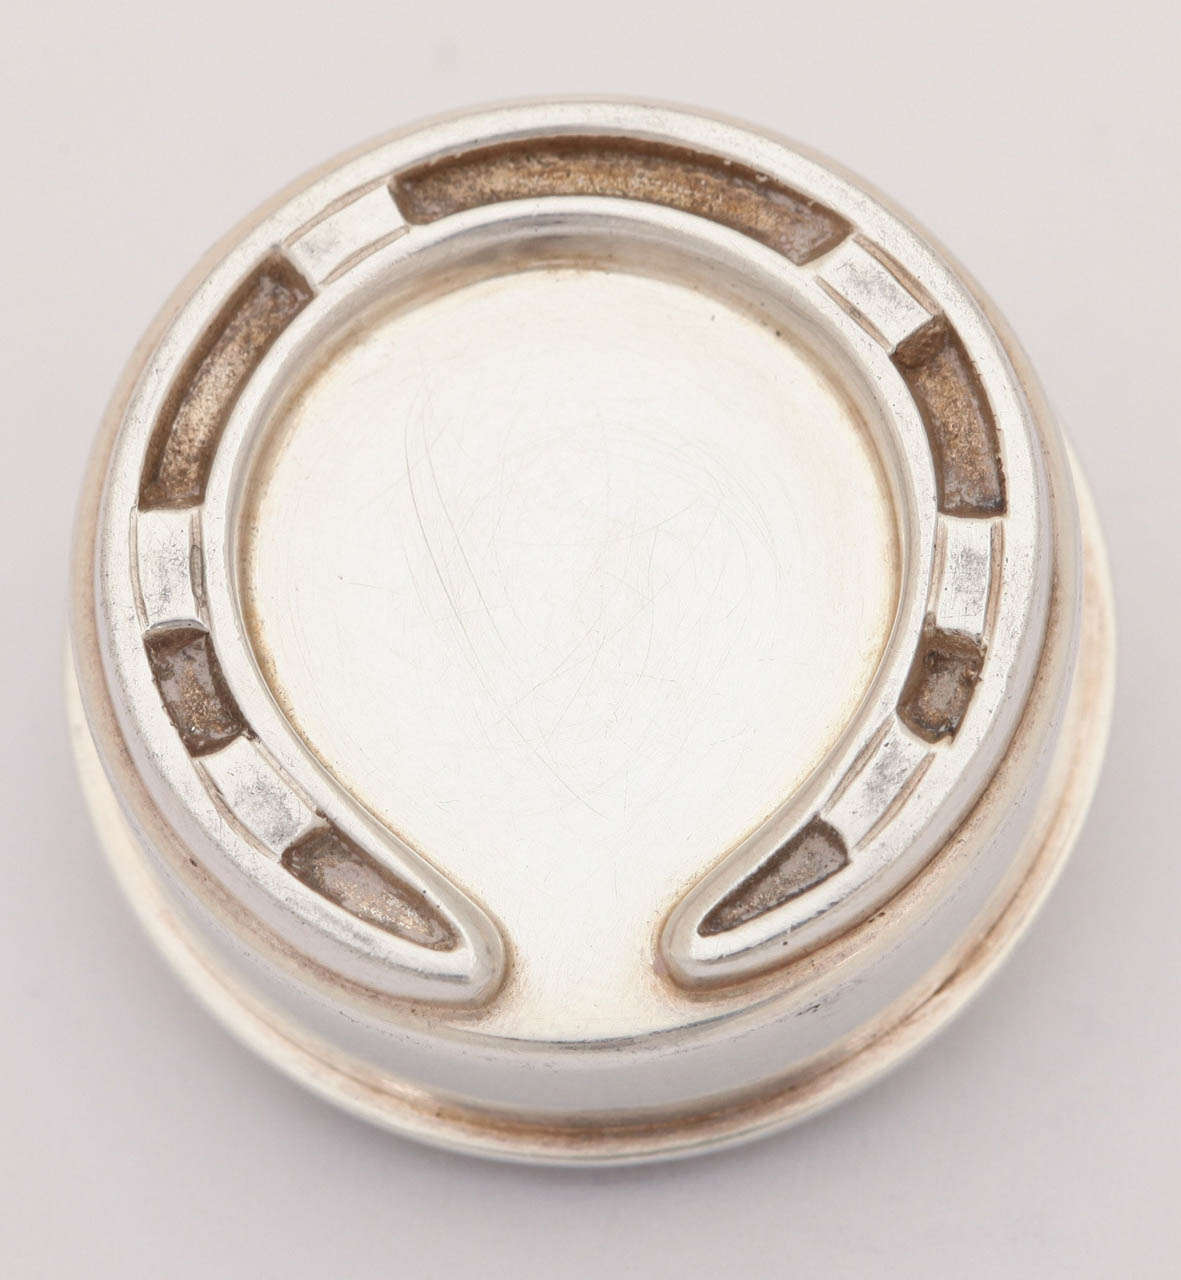 Hermes Sterling Silver Horseshoe Pill Box with vermeil interior. Marked Hermes Paris.